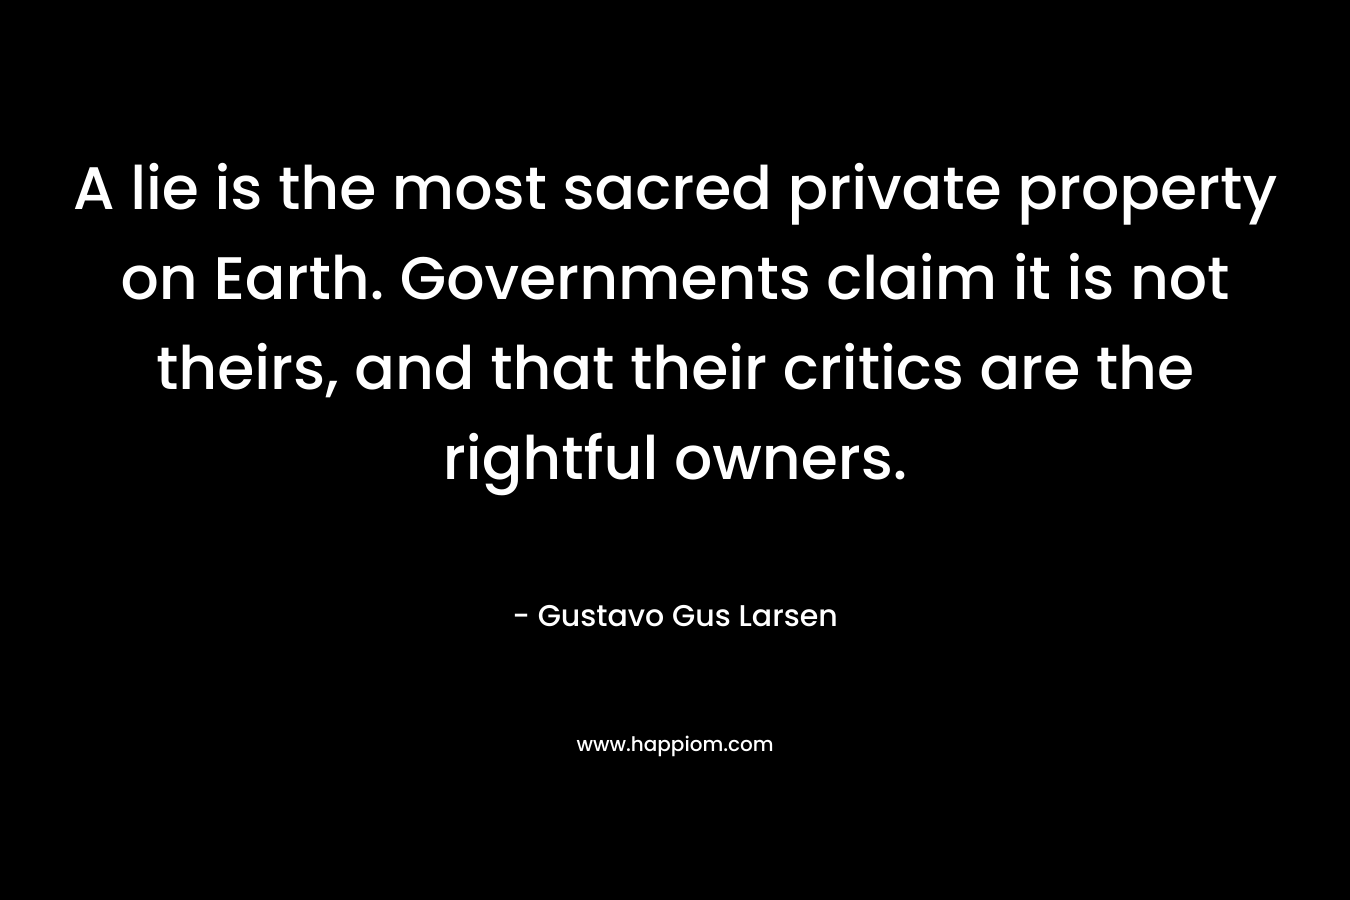 A lie is the most sacred private property on Earth. Governments claim it is not theirs, and that their critics are the rightful owners. – Gustavo Gus Larsen